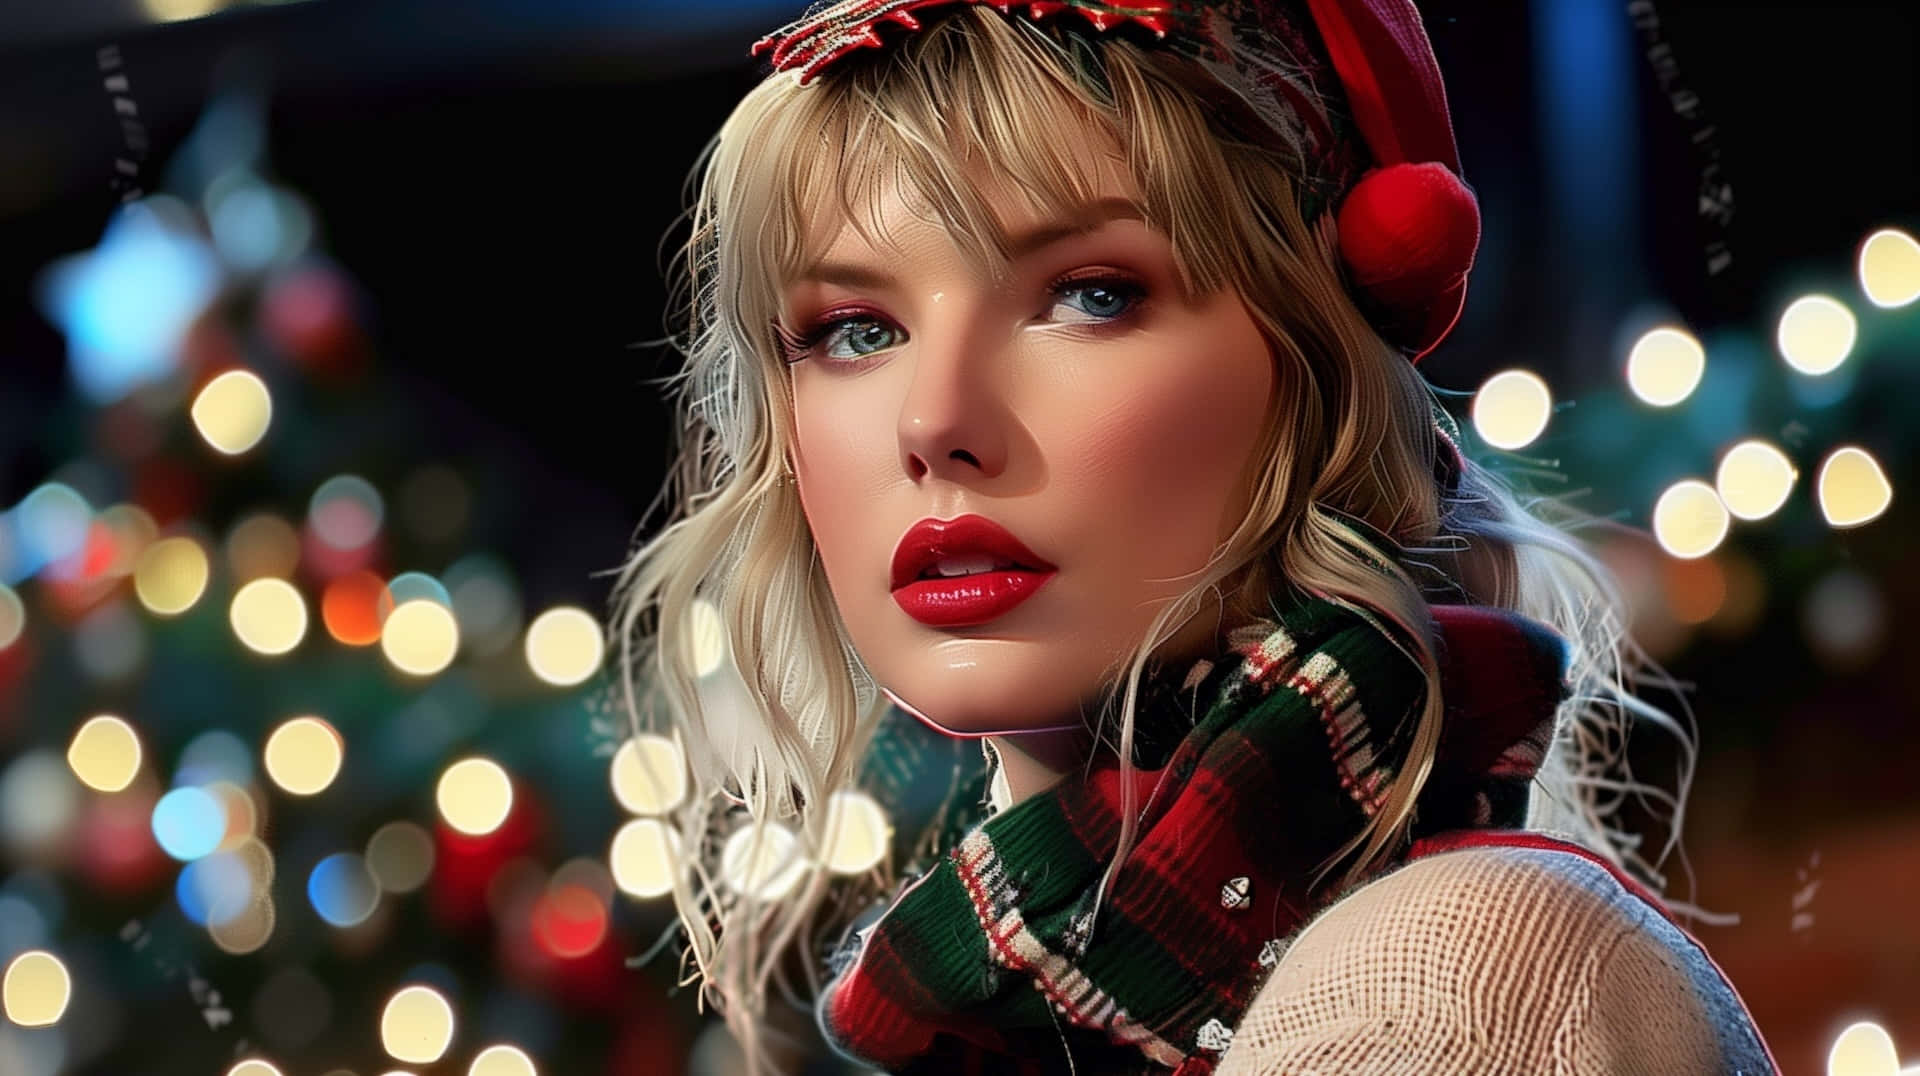 Holiday Styled Portrait Taylor Swift Wallpaper